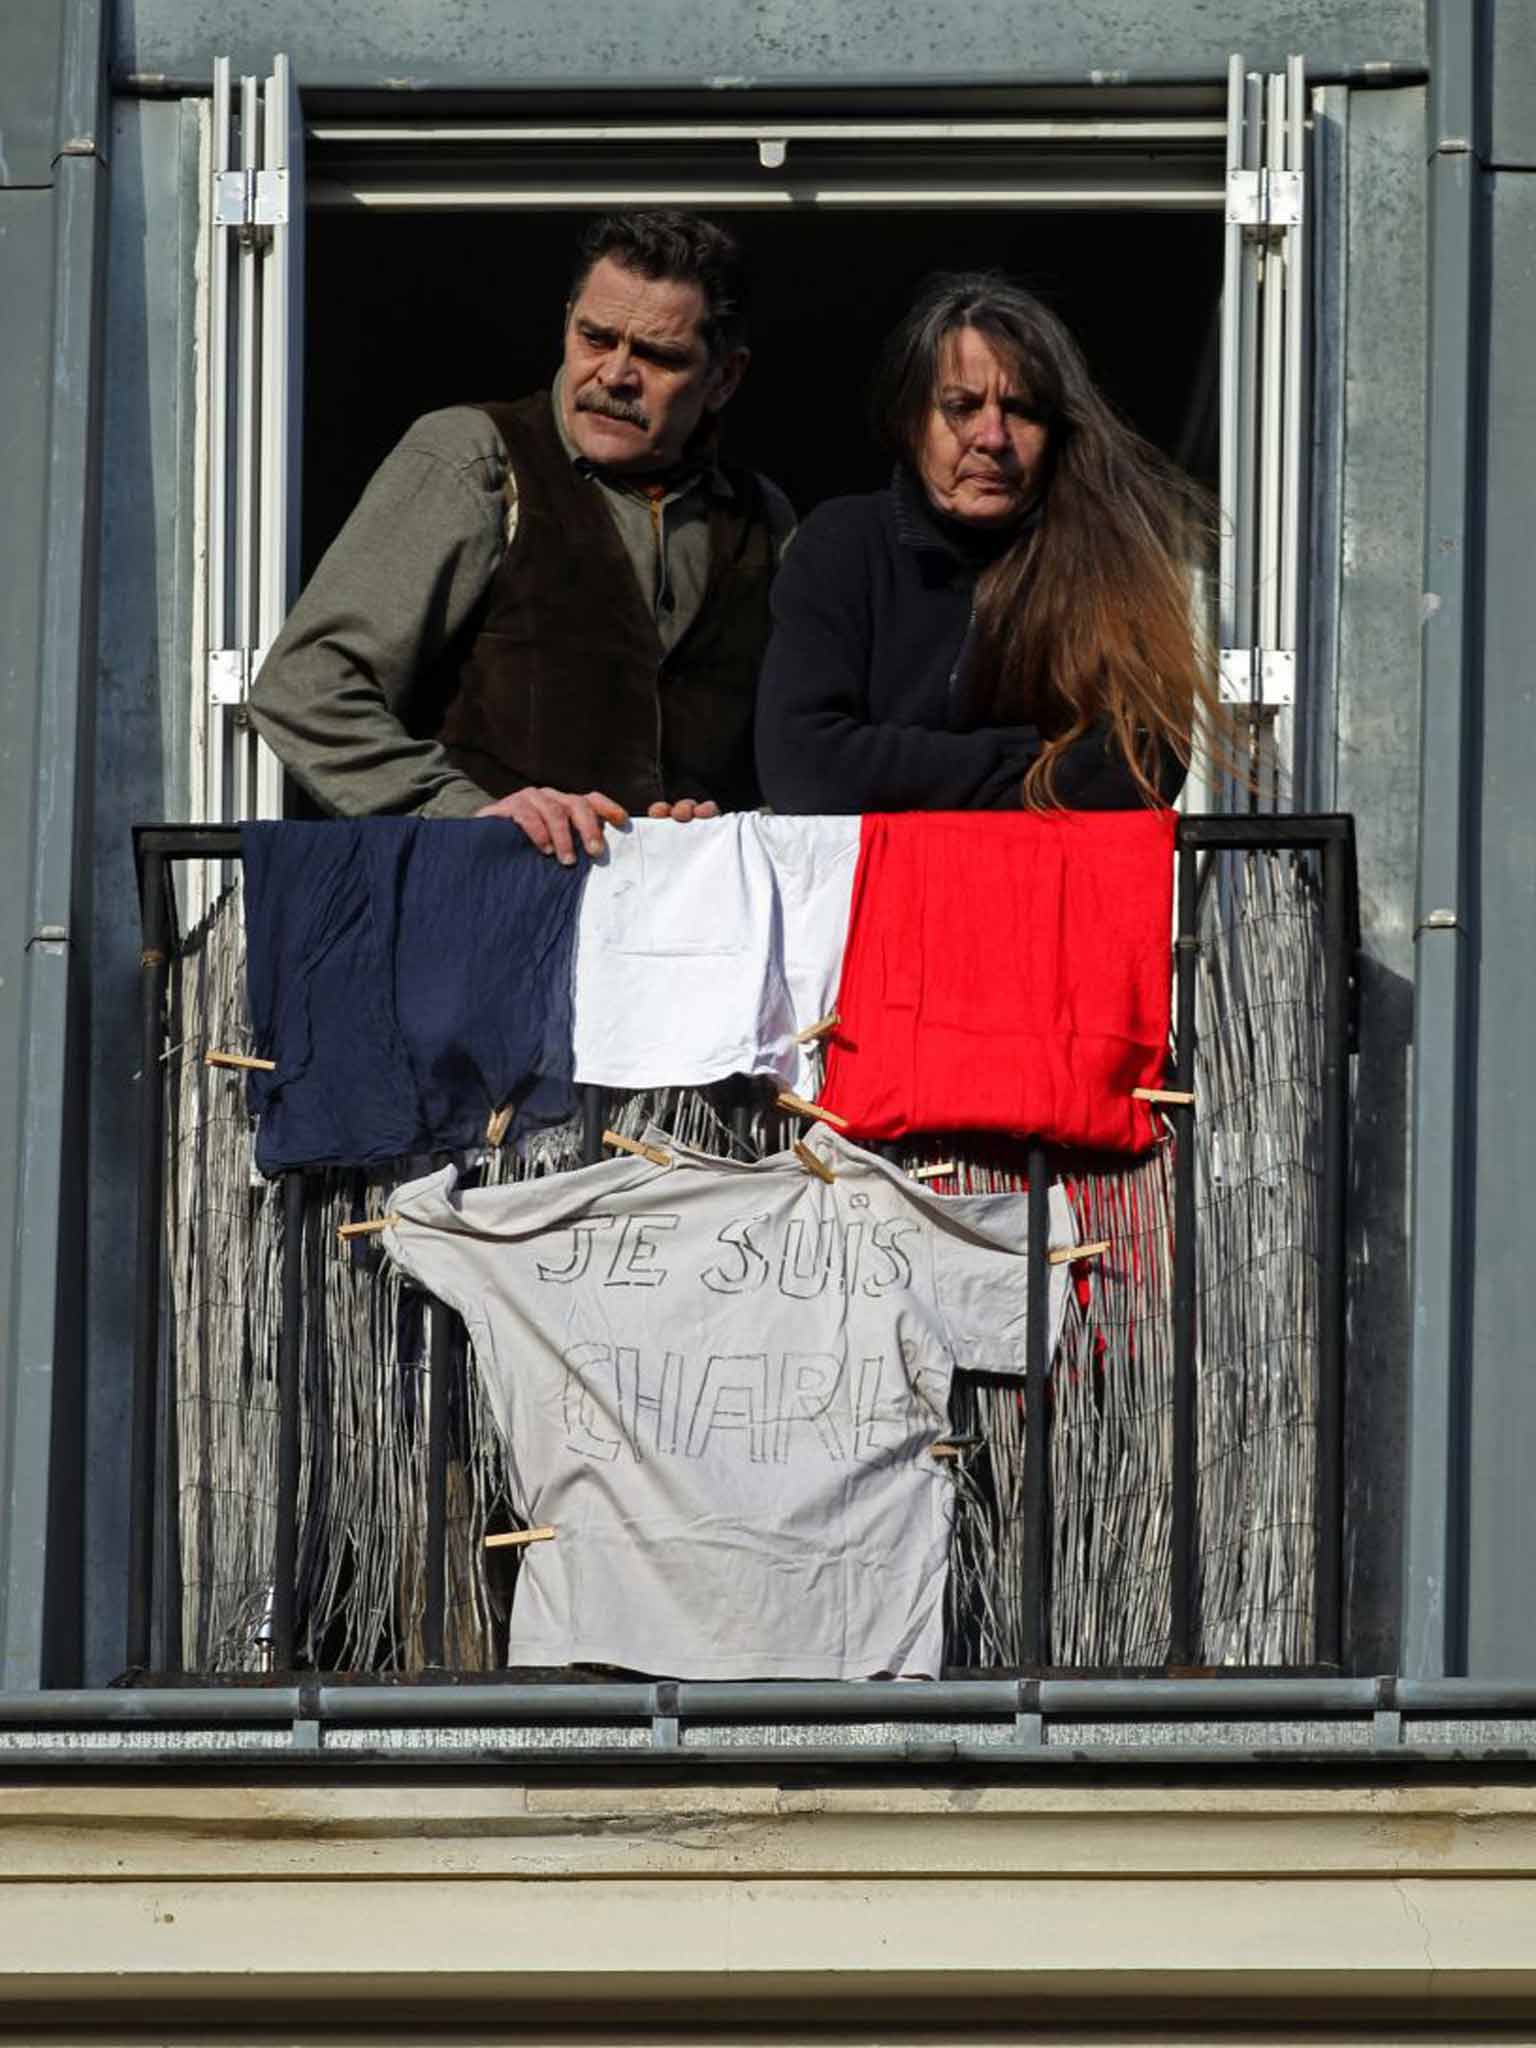 Us tous: Parisien couple show off their Tricolour and support for Je Suis Charlie movement